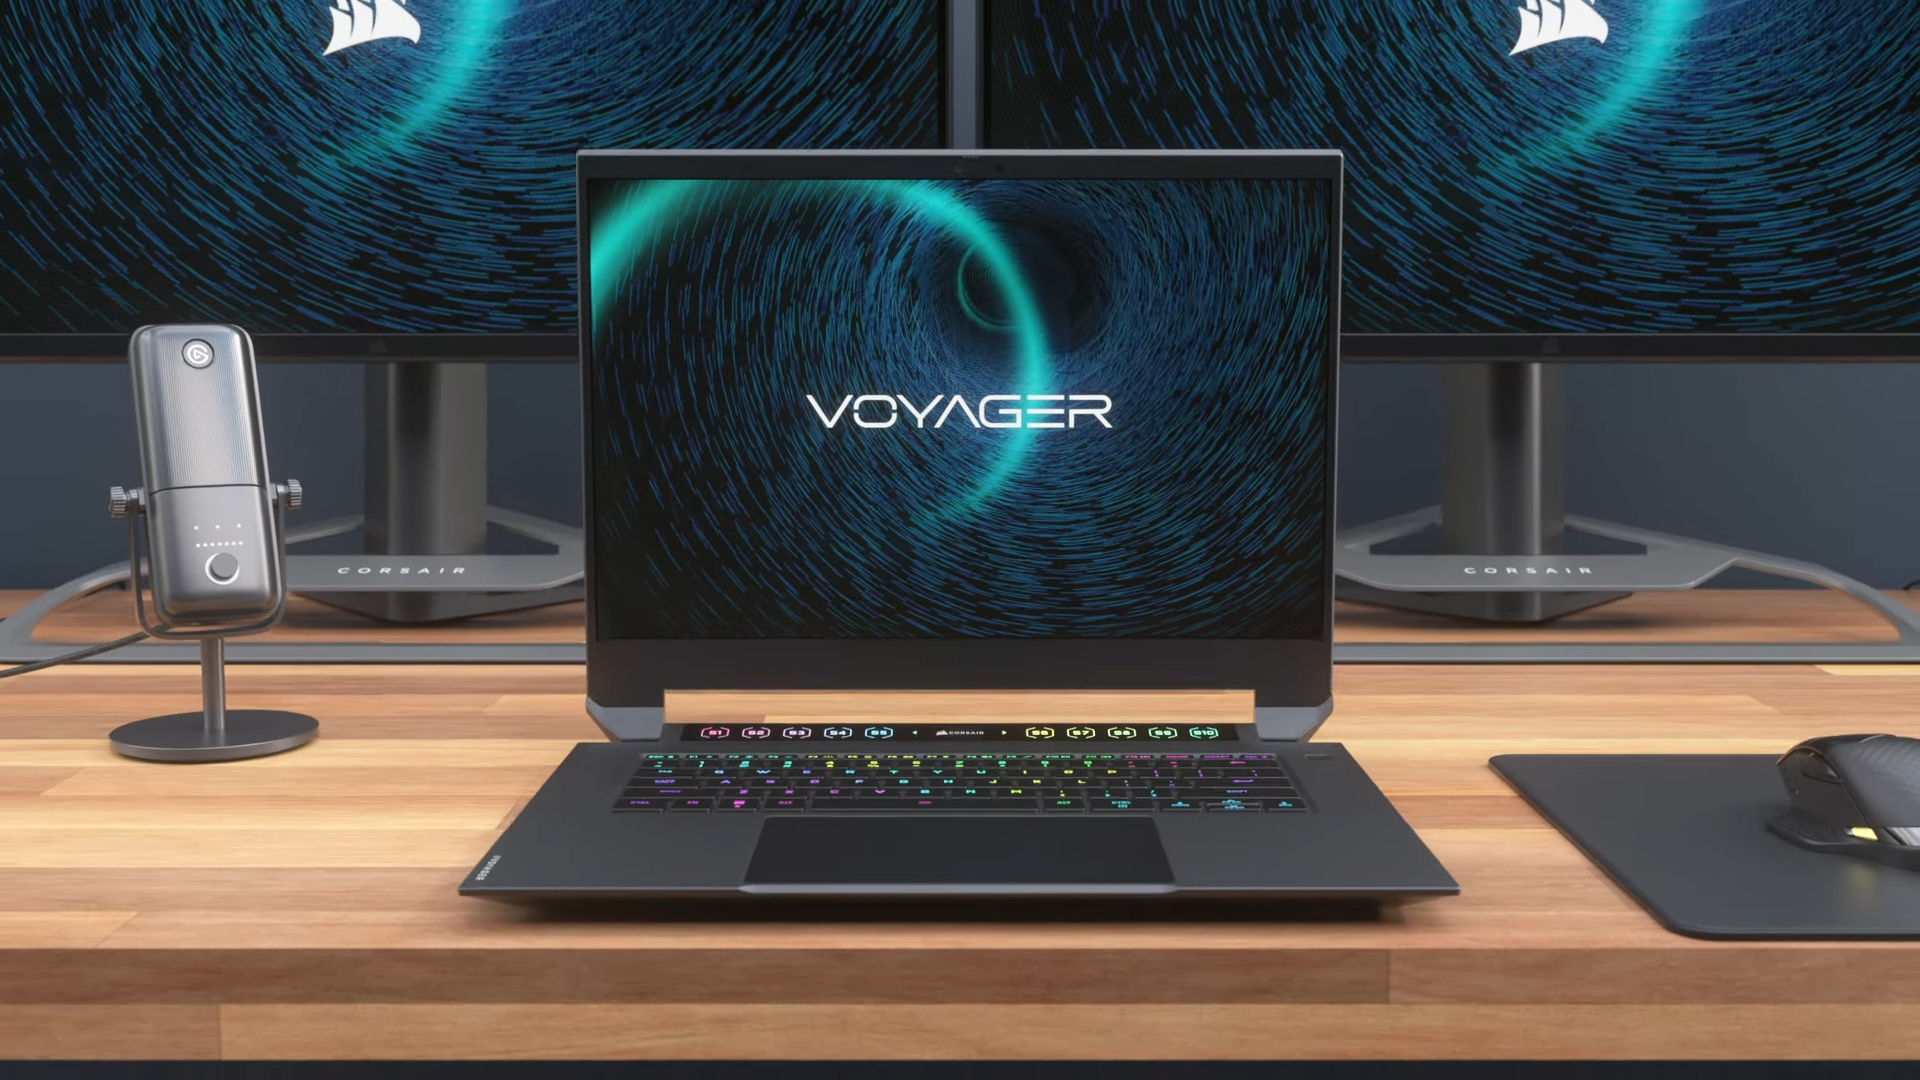 Corsair Voyager a1600 laptop with AMD Ryzen 9 6900HS and Radeon RX 6800M at 3000 USD VideoCardz.com